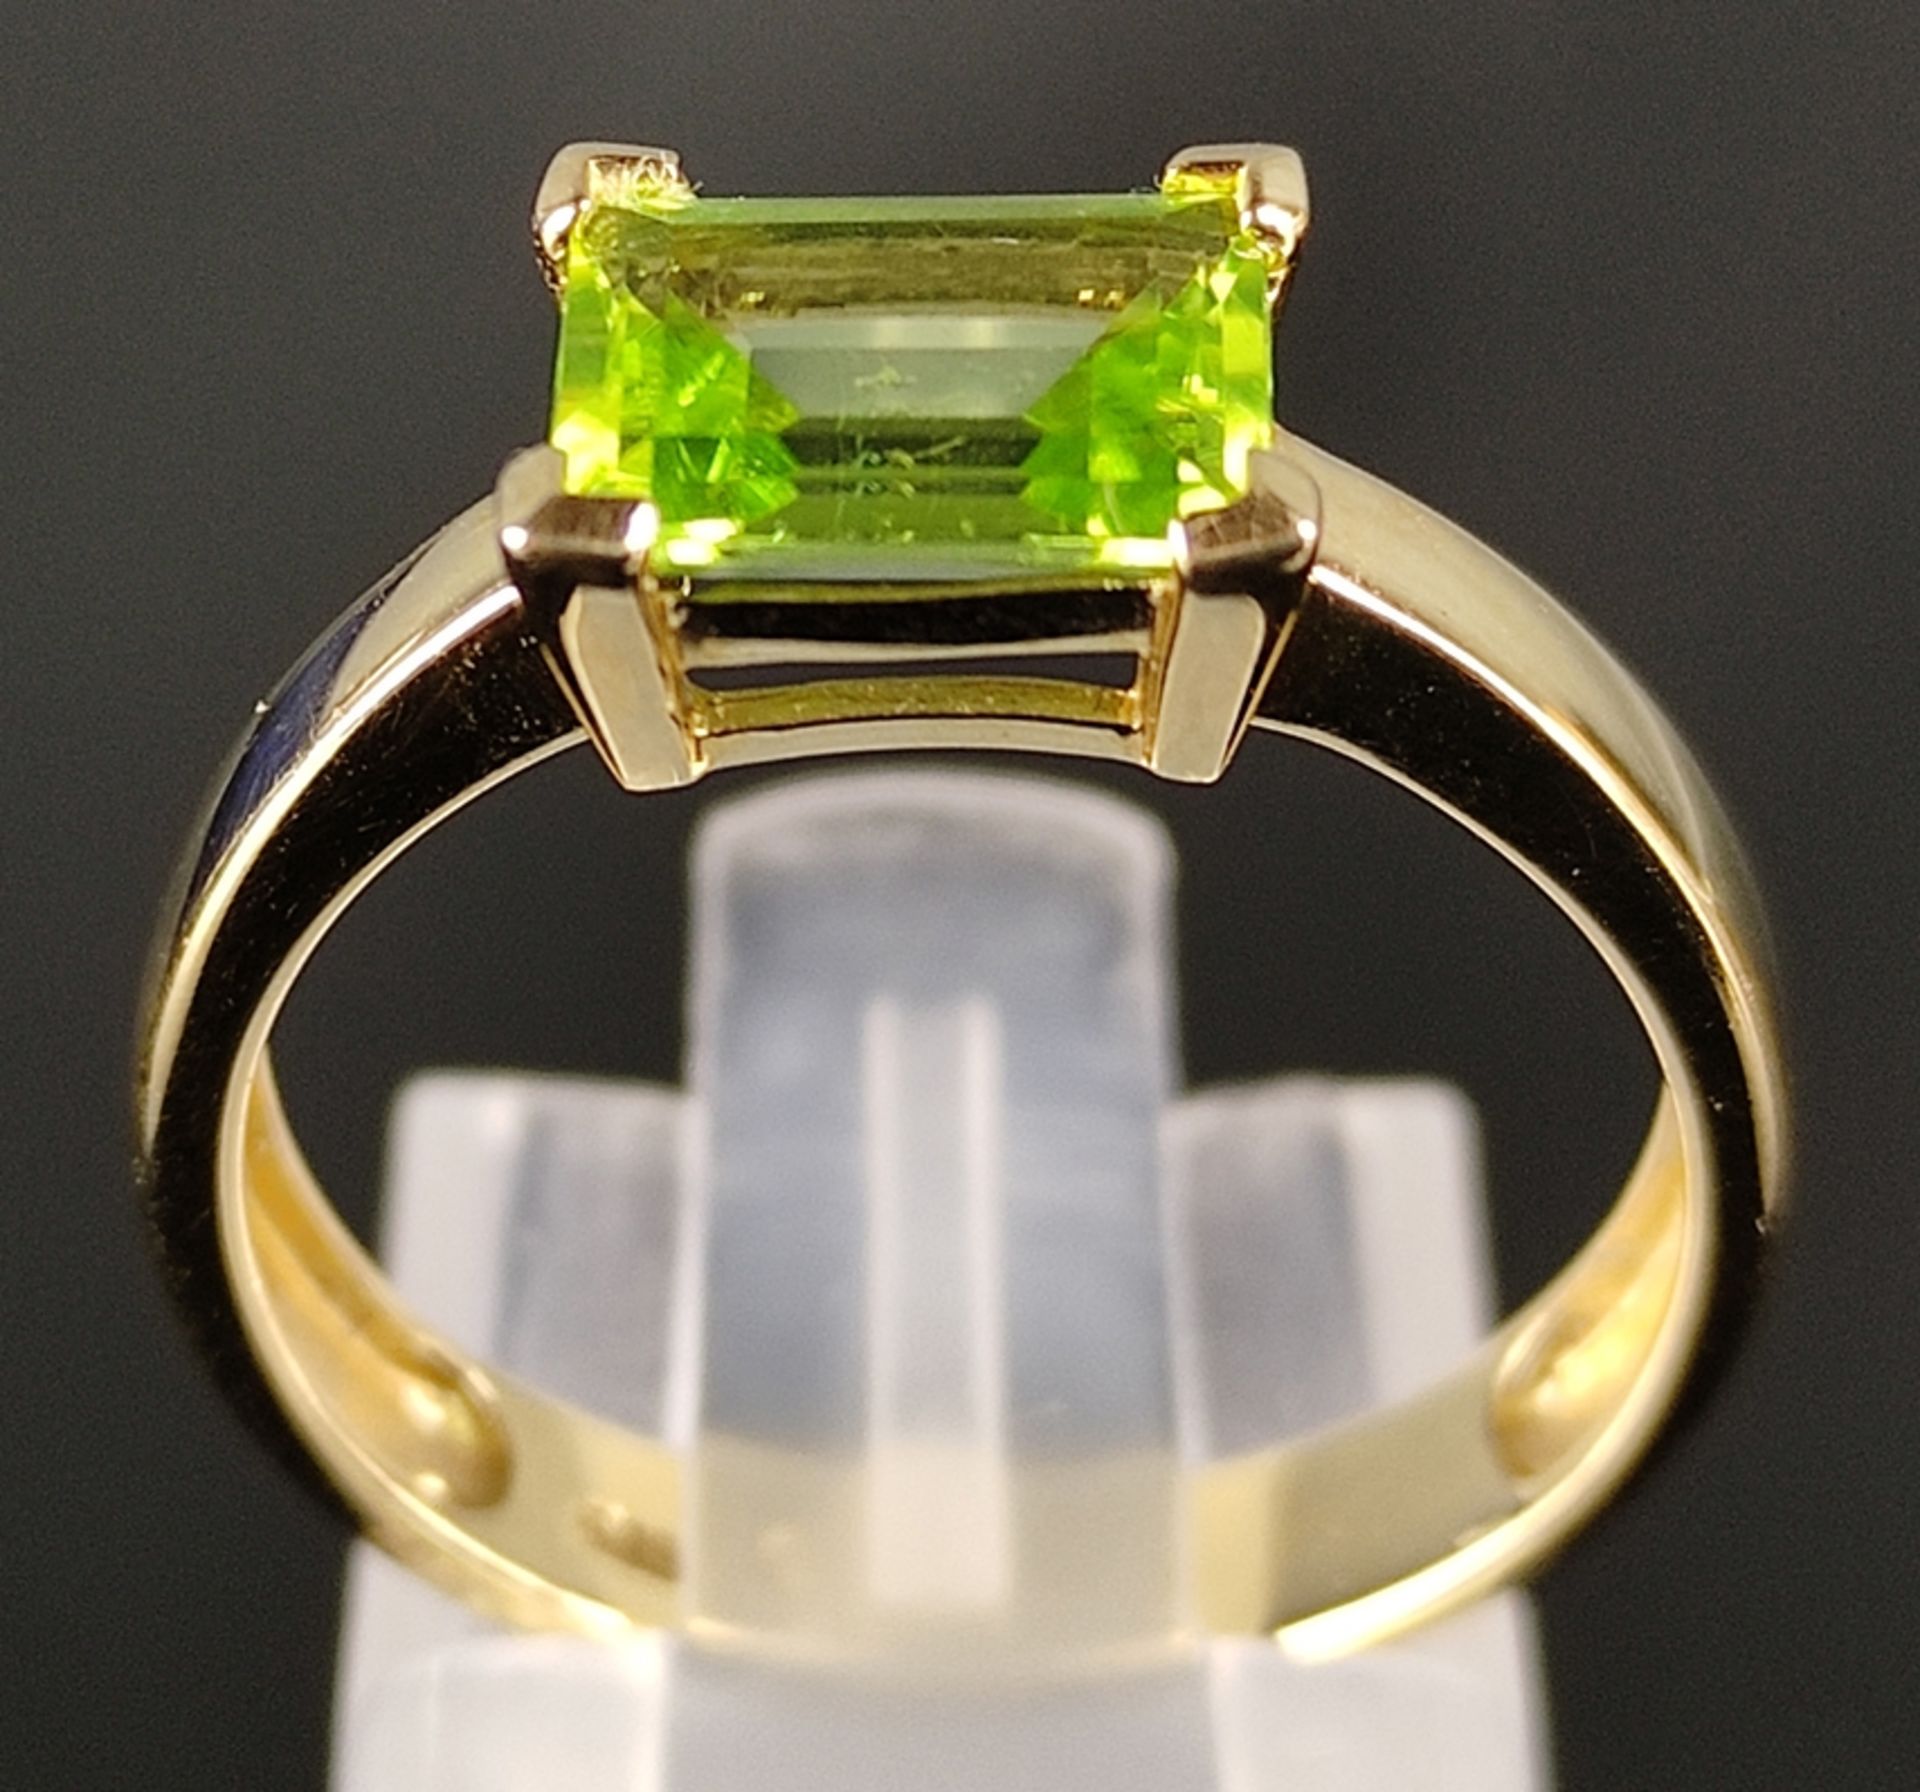 Bandring mit Peridot im Treppen-Schliff, 585/14K Gelbgold, 3g, Größe 55Band ring with staircase - Image 4 of 5